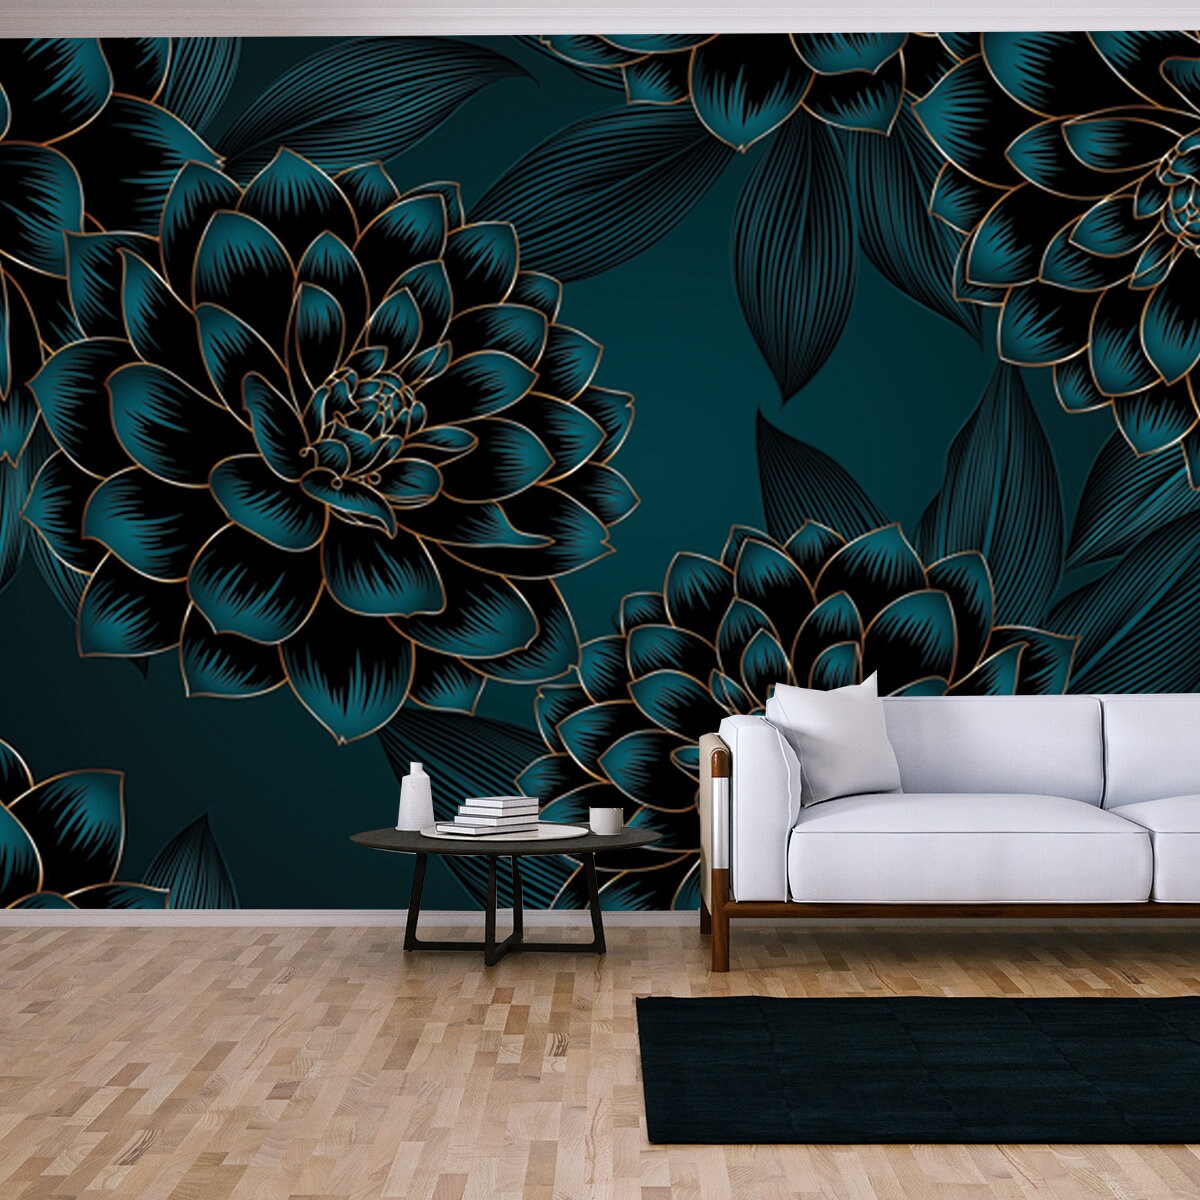 Luxurious Vintage Seamless Pattern with Golden Flowers Dahlia and Leaves Wallpaper Living Room Mural